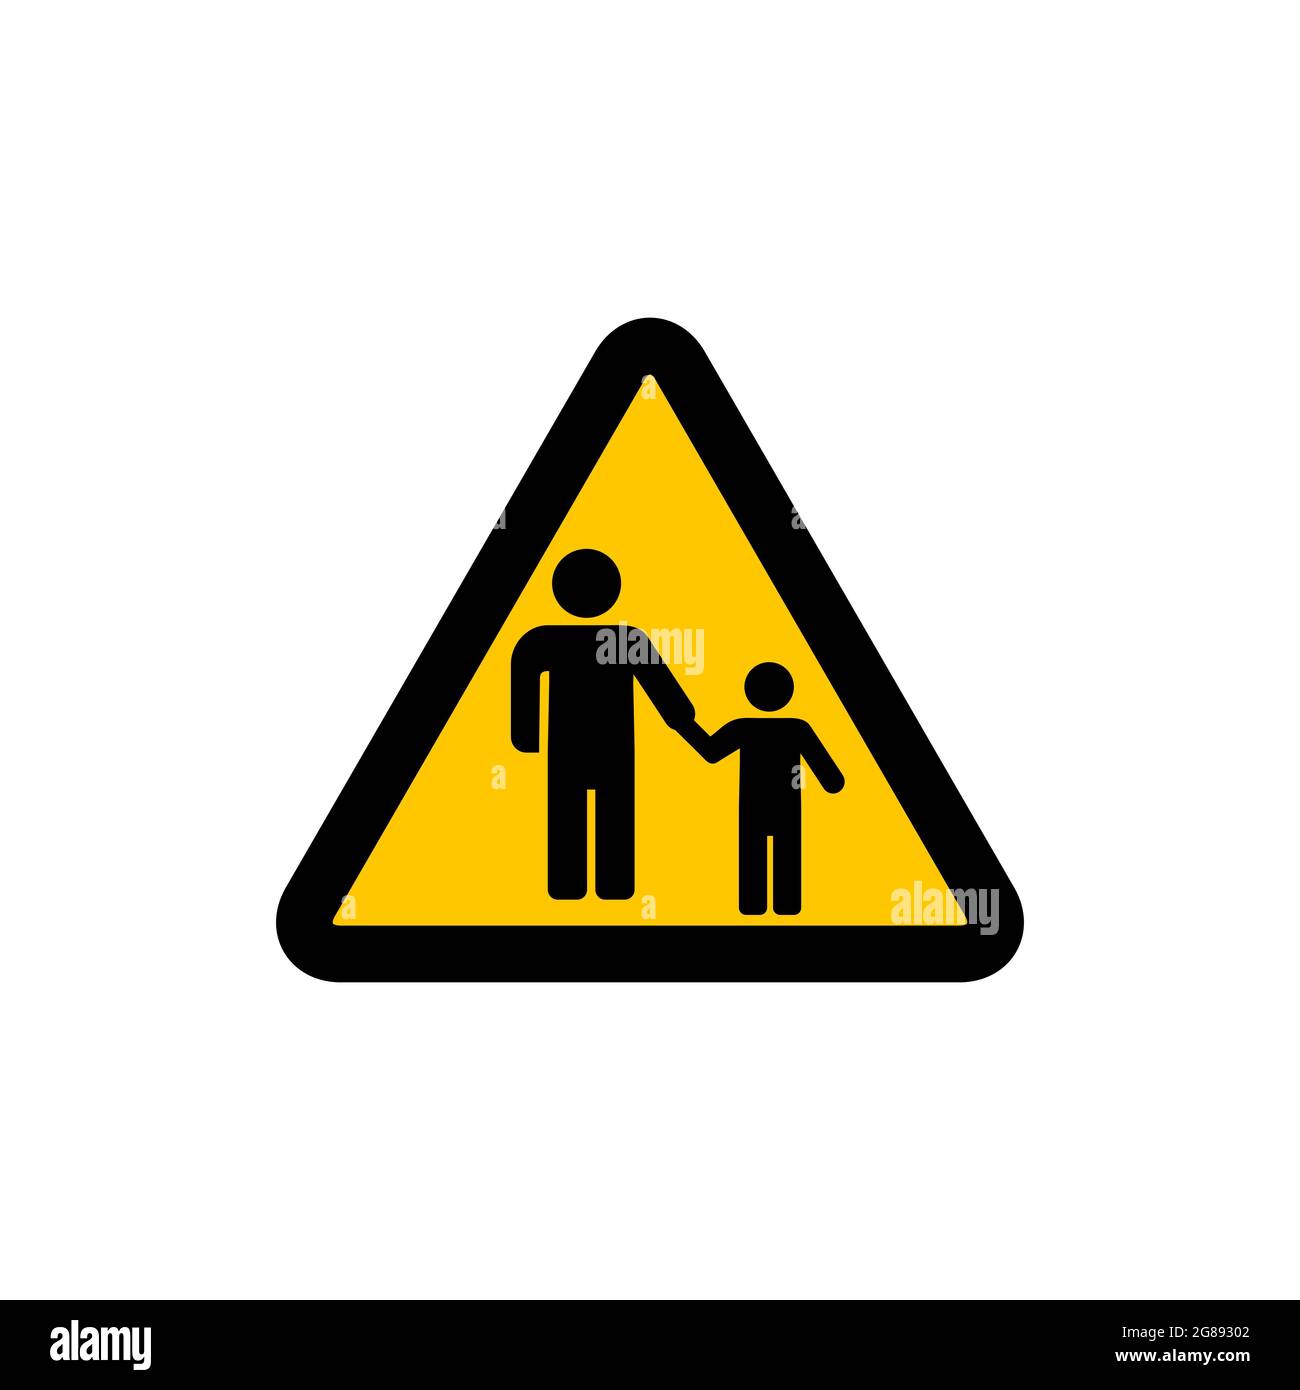 Yellow Triangle Warning Road Vector Sign For Crossing The Road Adult